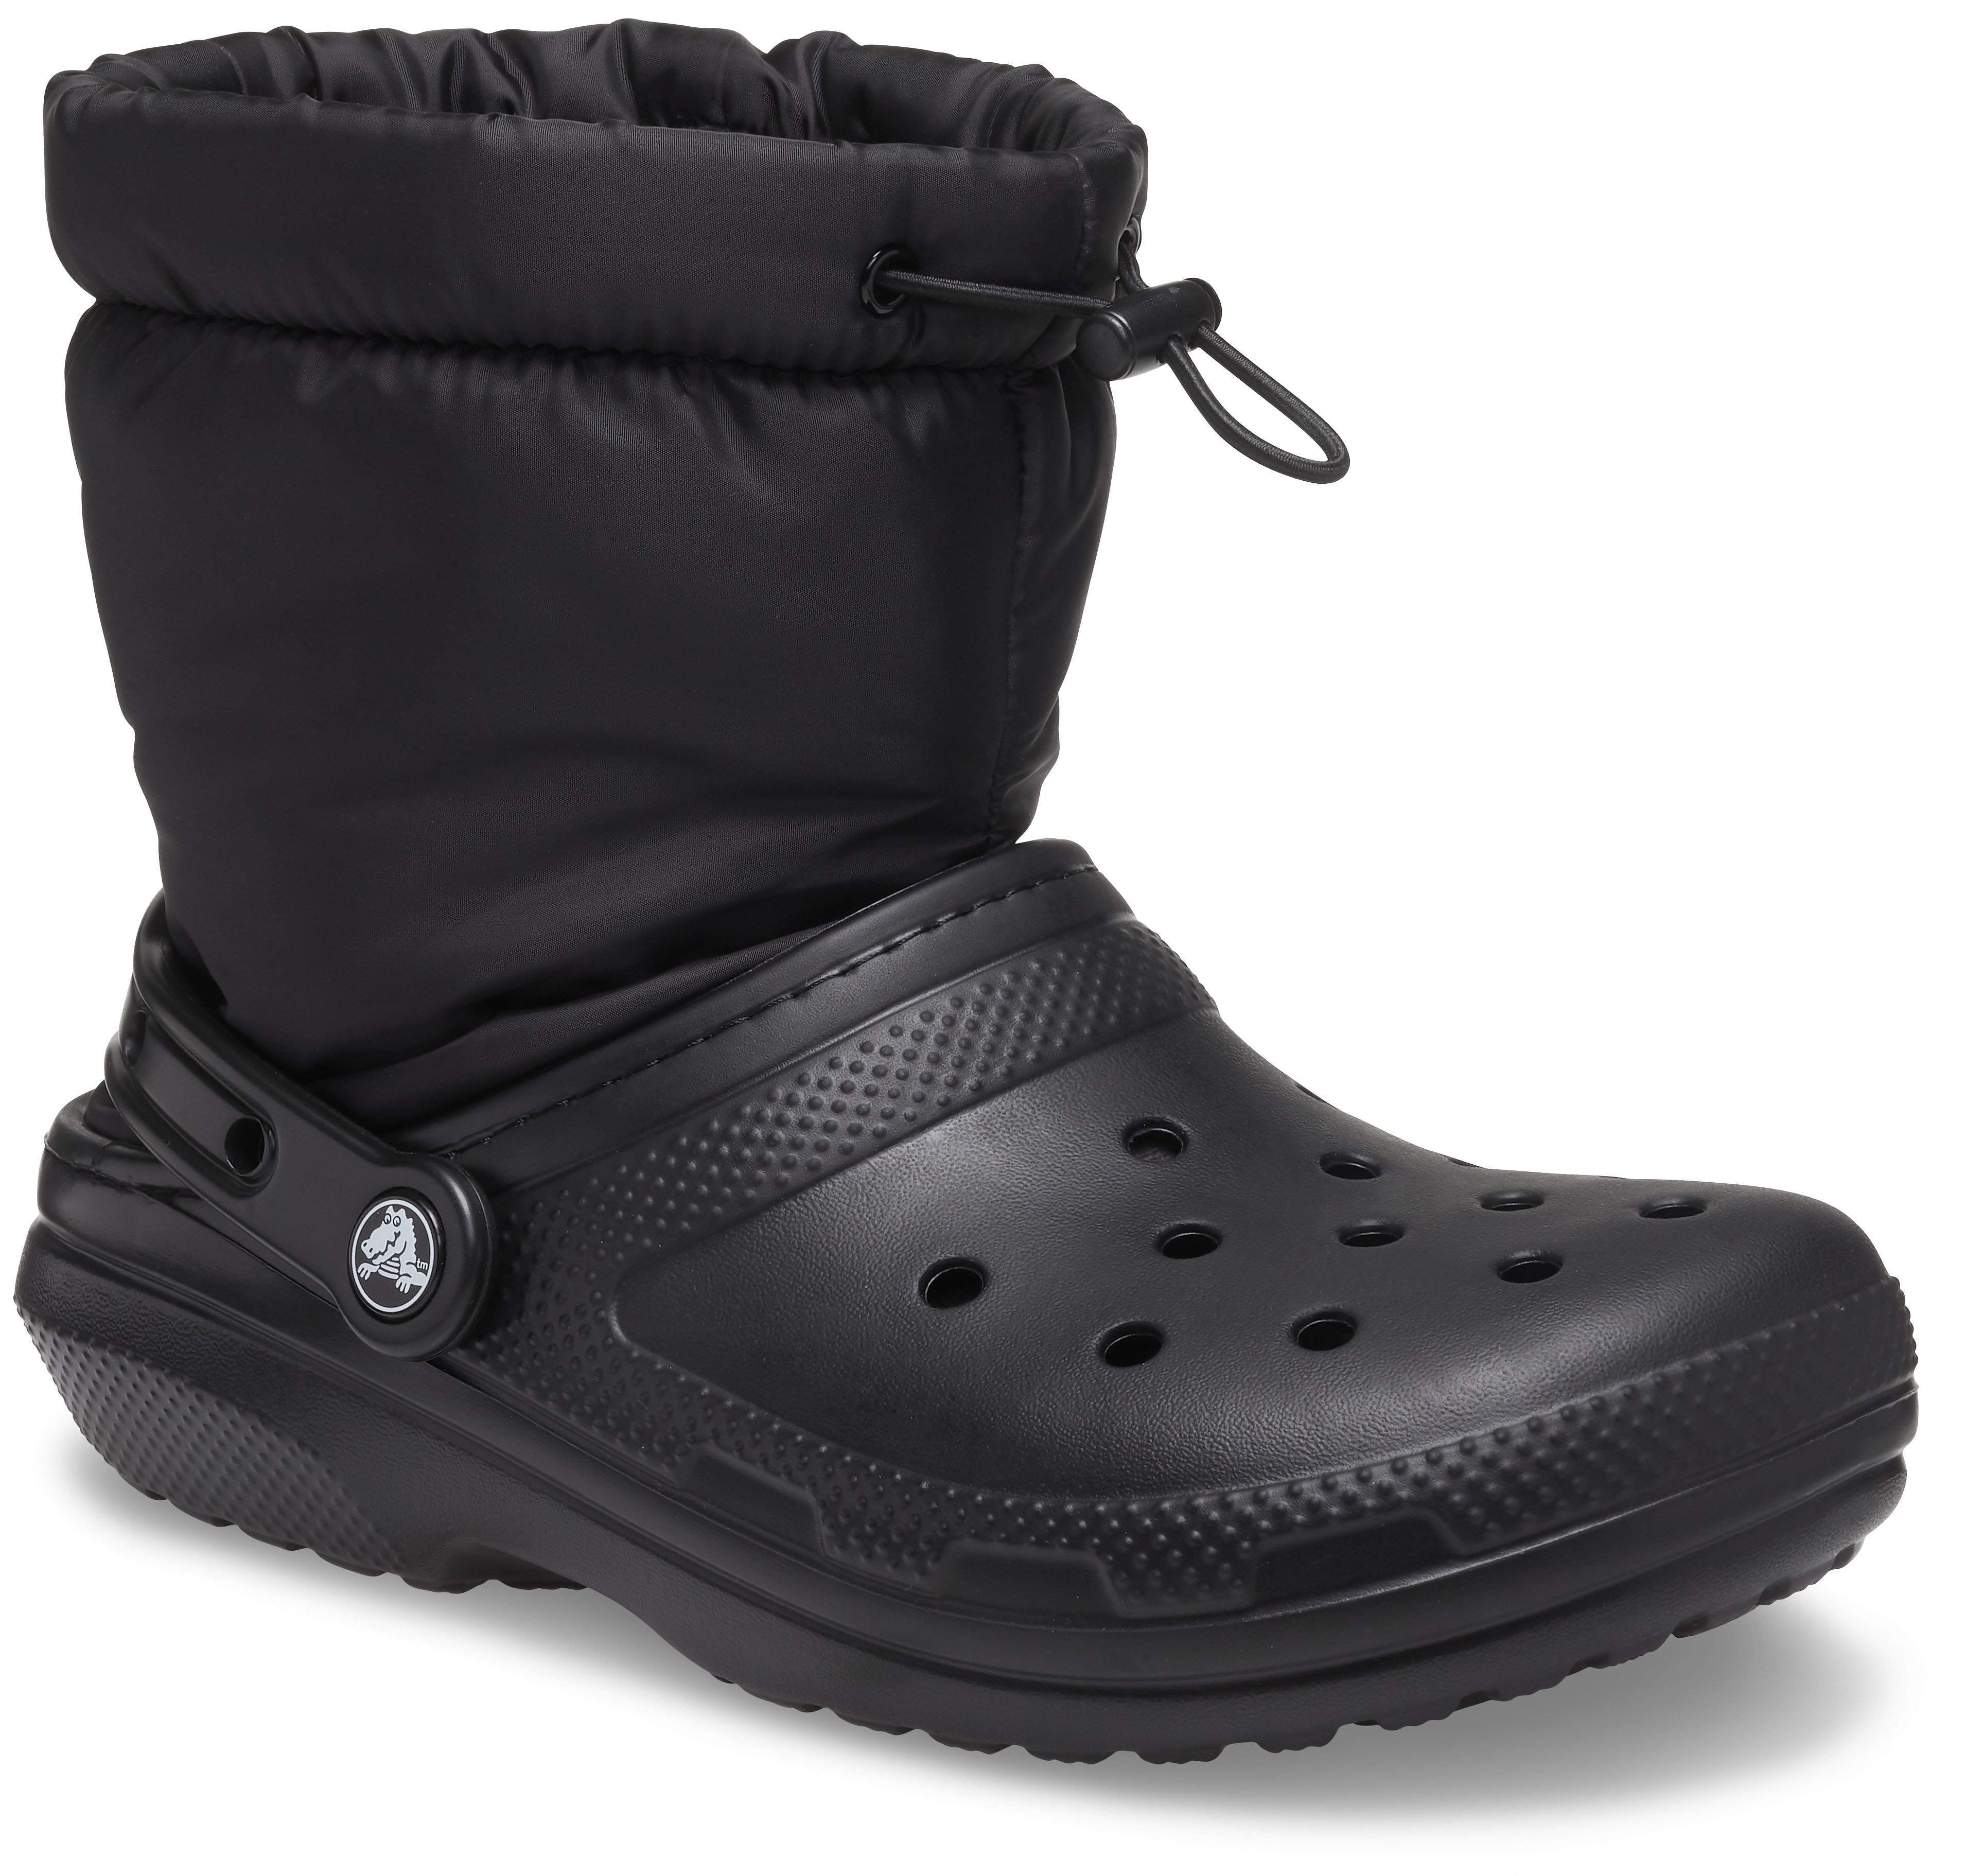 croc boots with holes